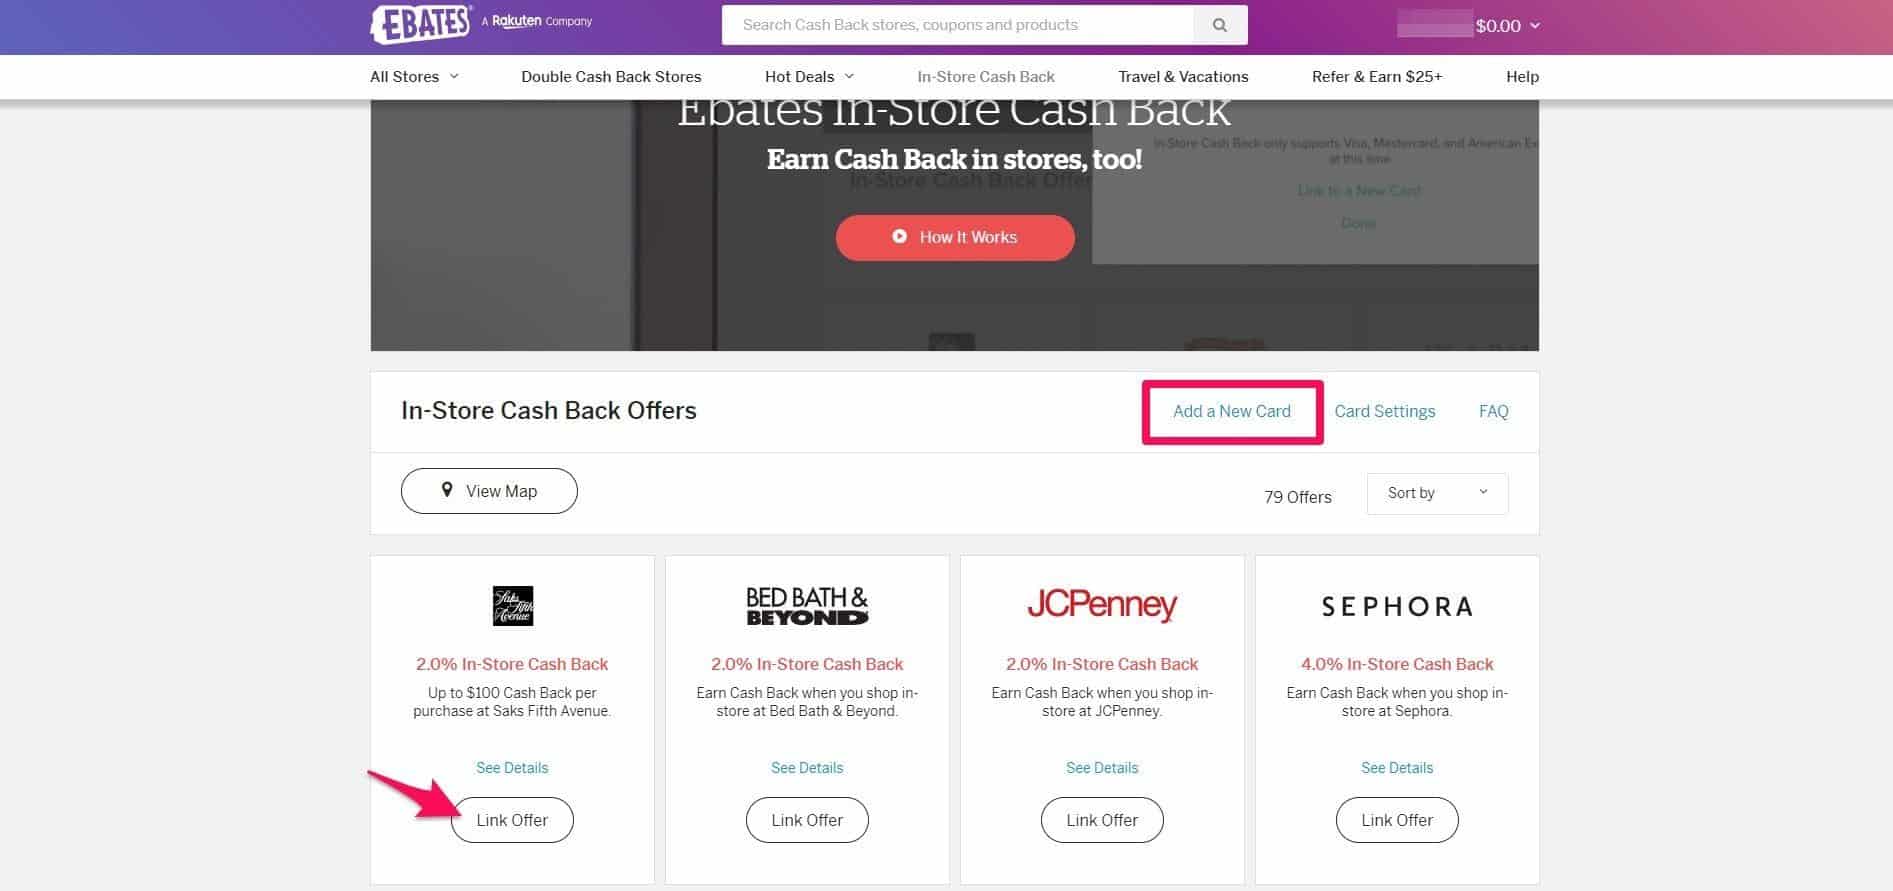 in-store cash back offers